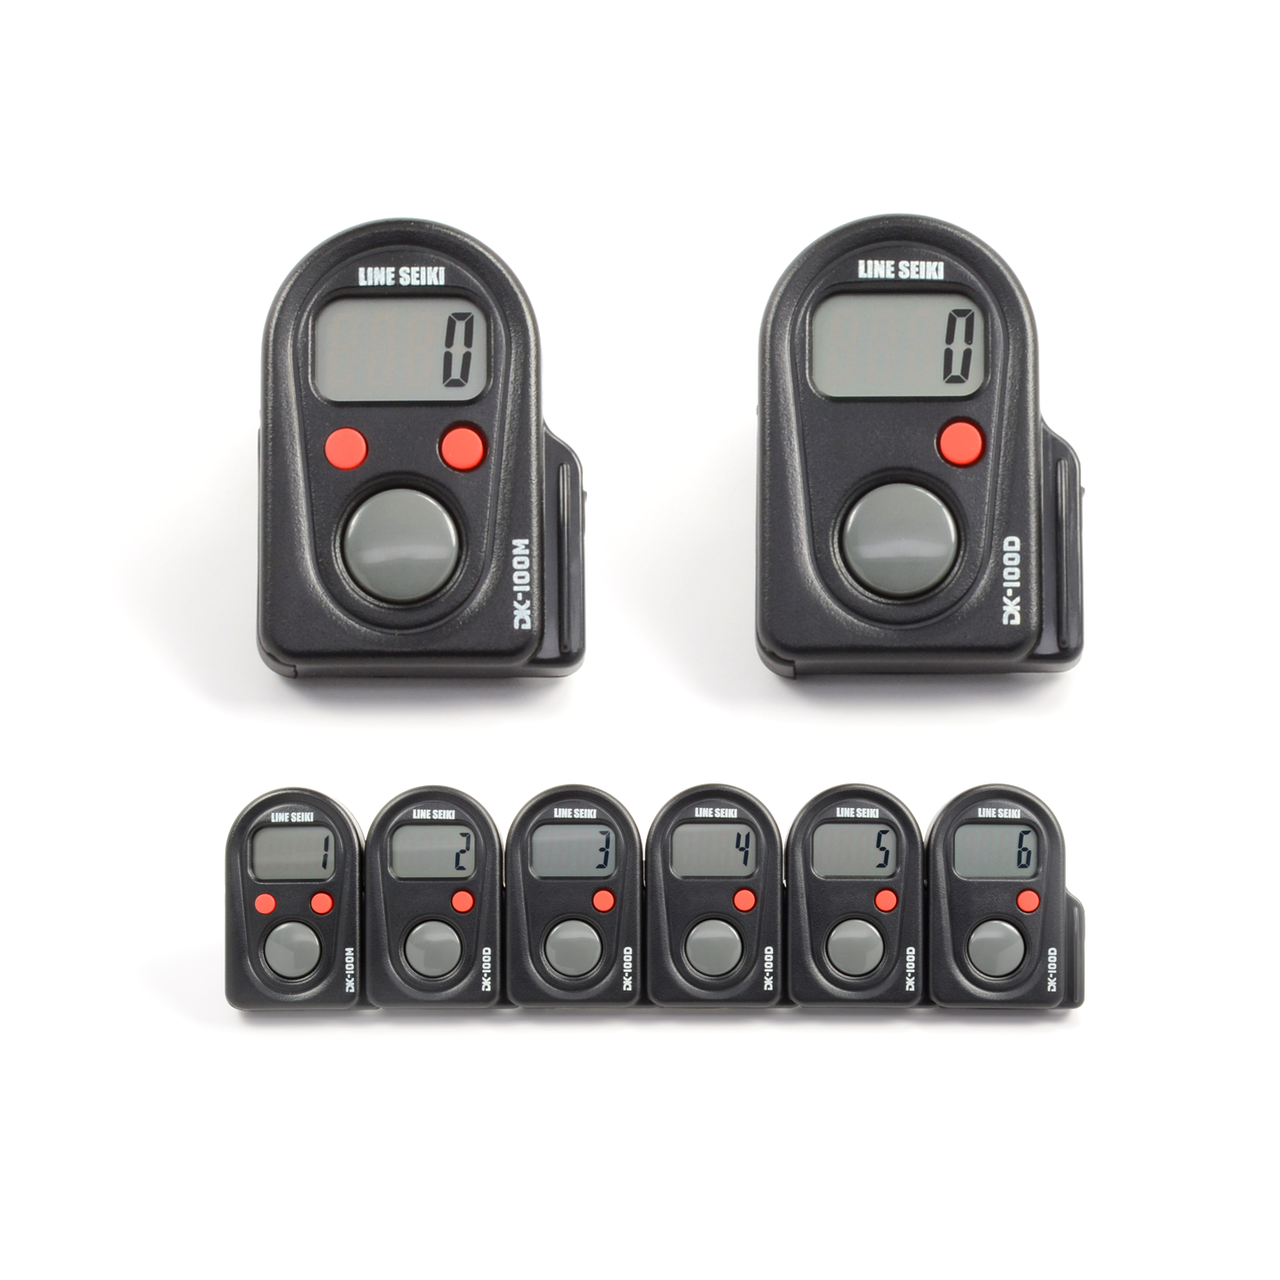 DK-100D & DK-100M Electronic Tally Counters